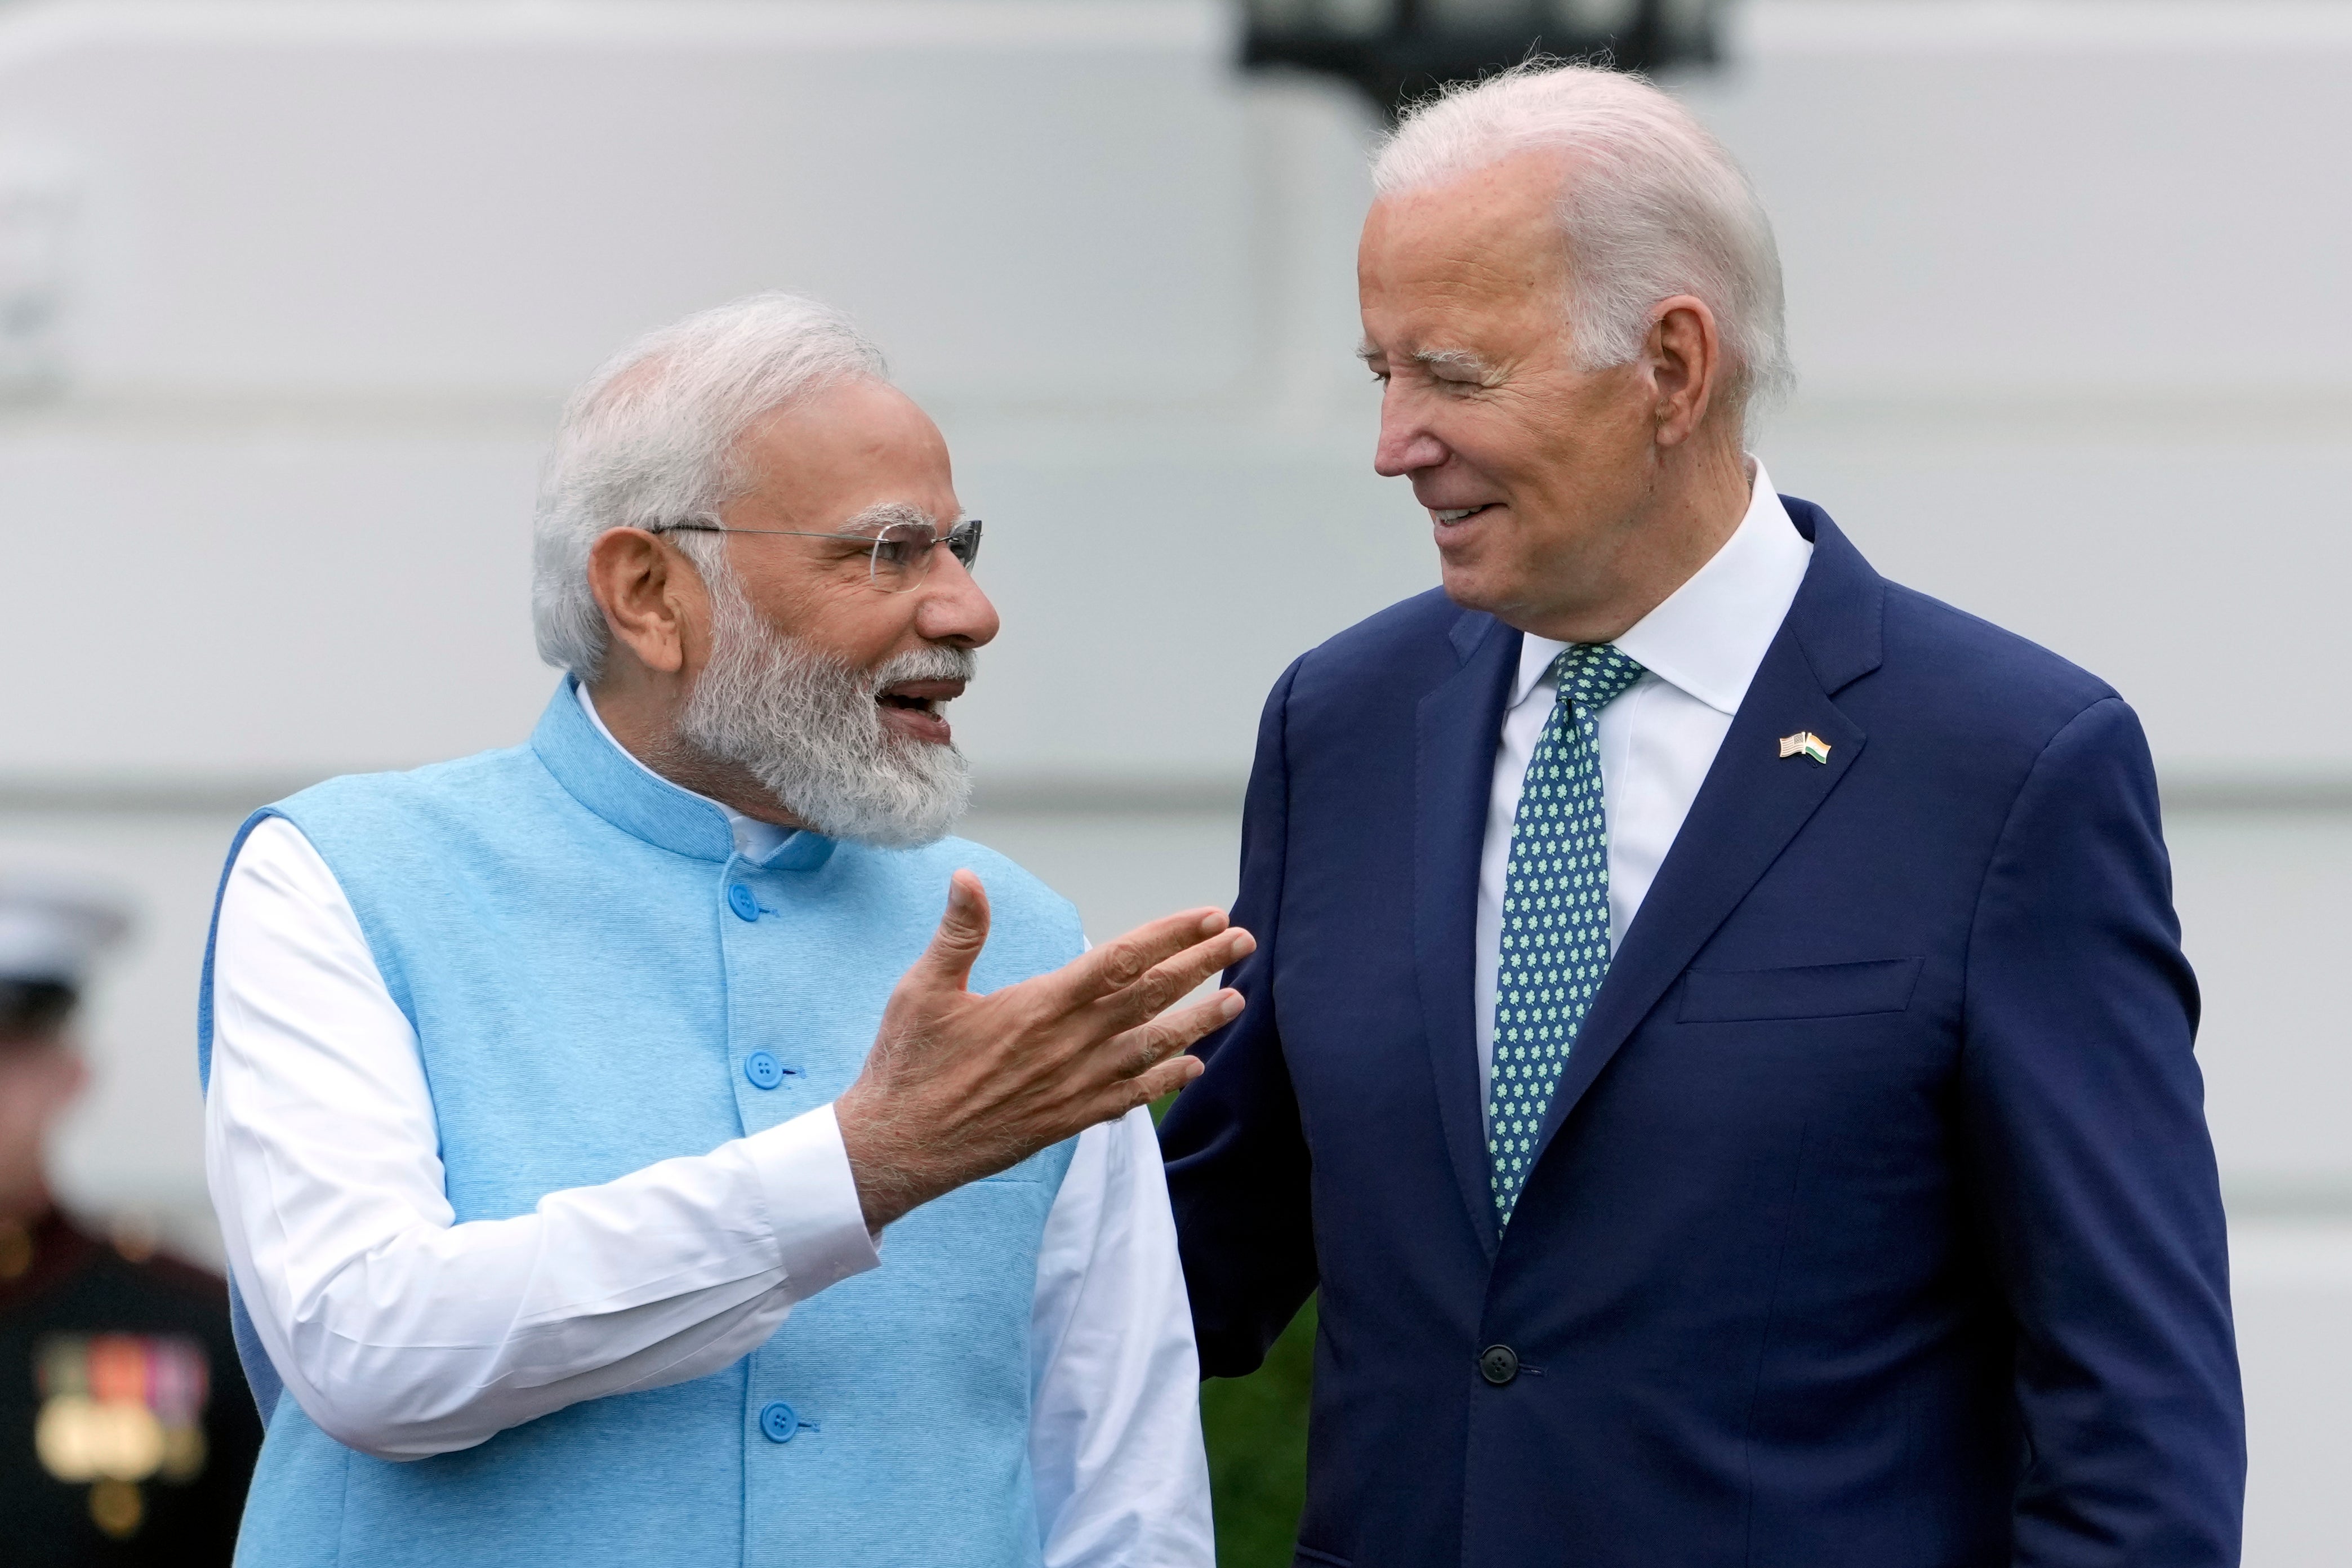 India’s Prime Minister Narendra Modi and US President Joe Biden during a State Arrival Ceremony at the White House